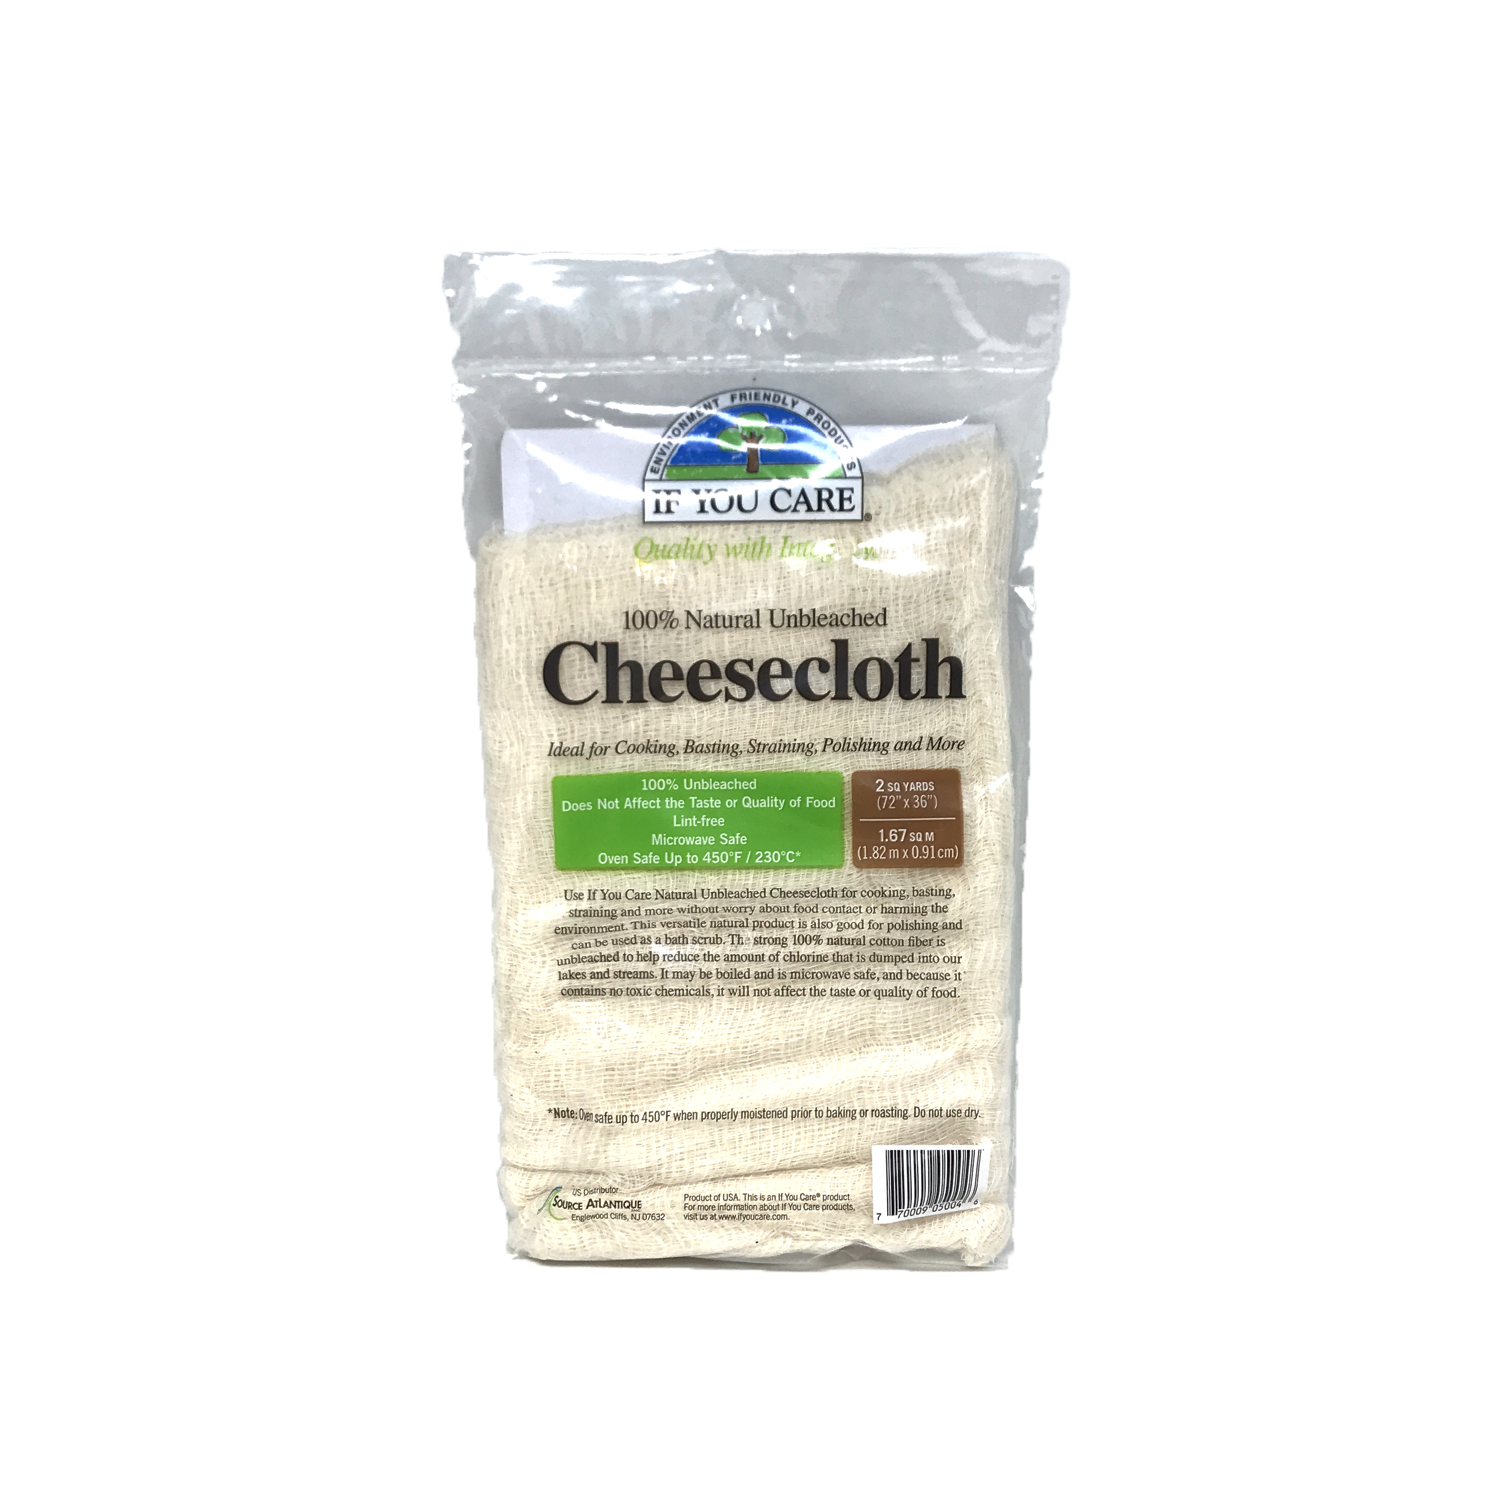 If You Care 100% Natural Unbleached Cheesecloth 2 sq. yards